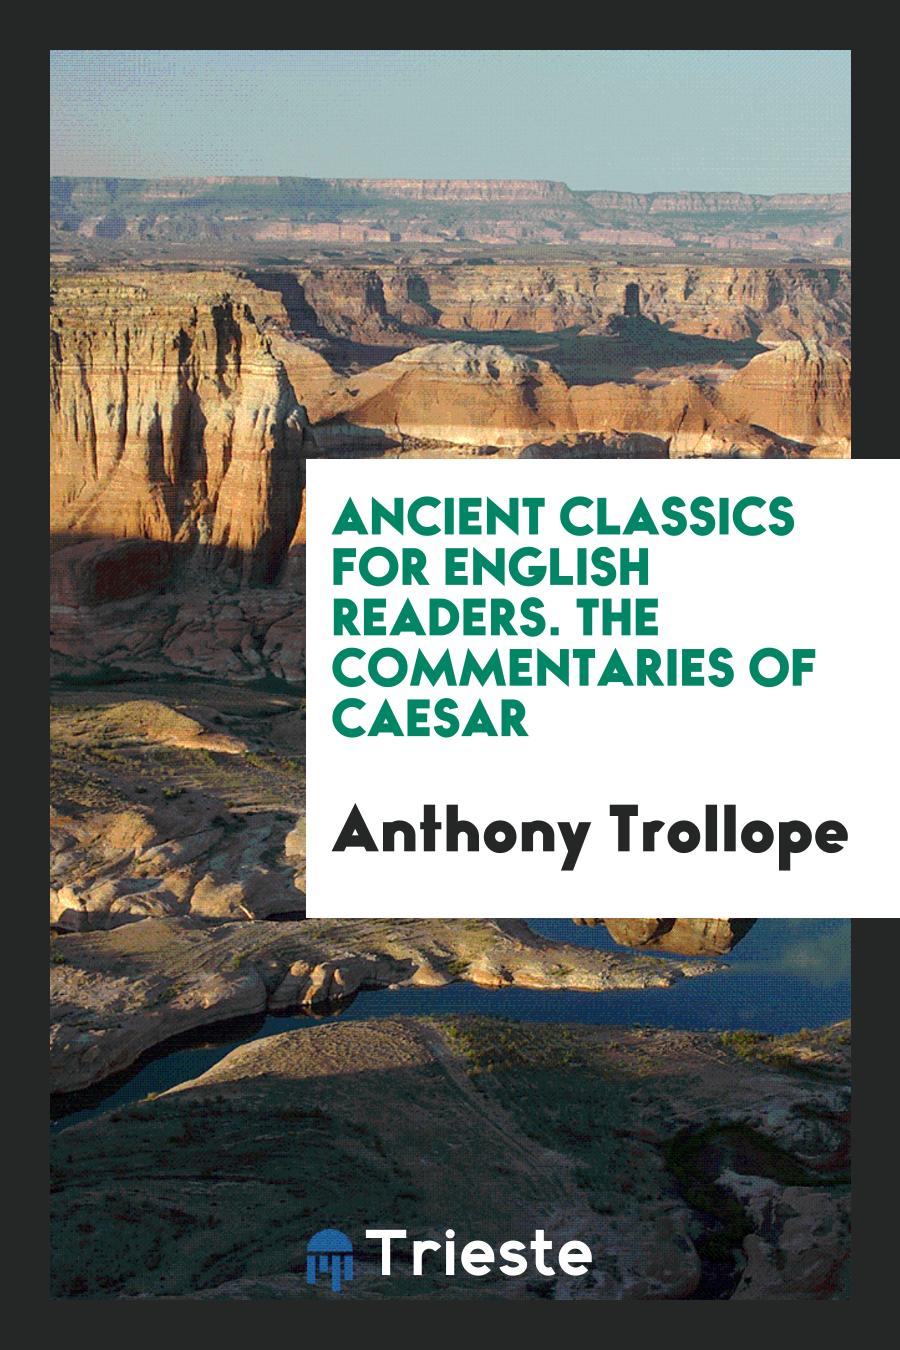 Ancient Classics for English Readers. The Commentaries of Caesar